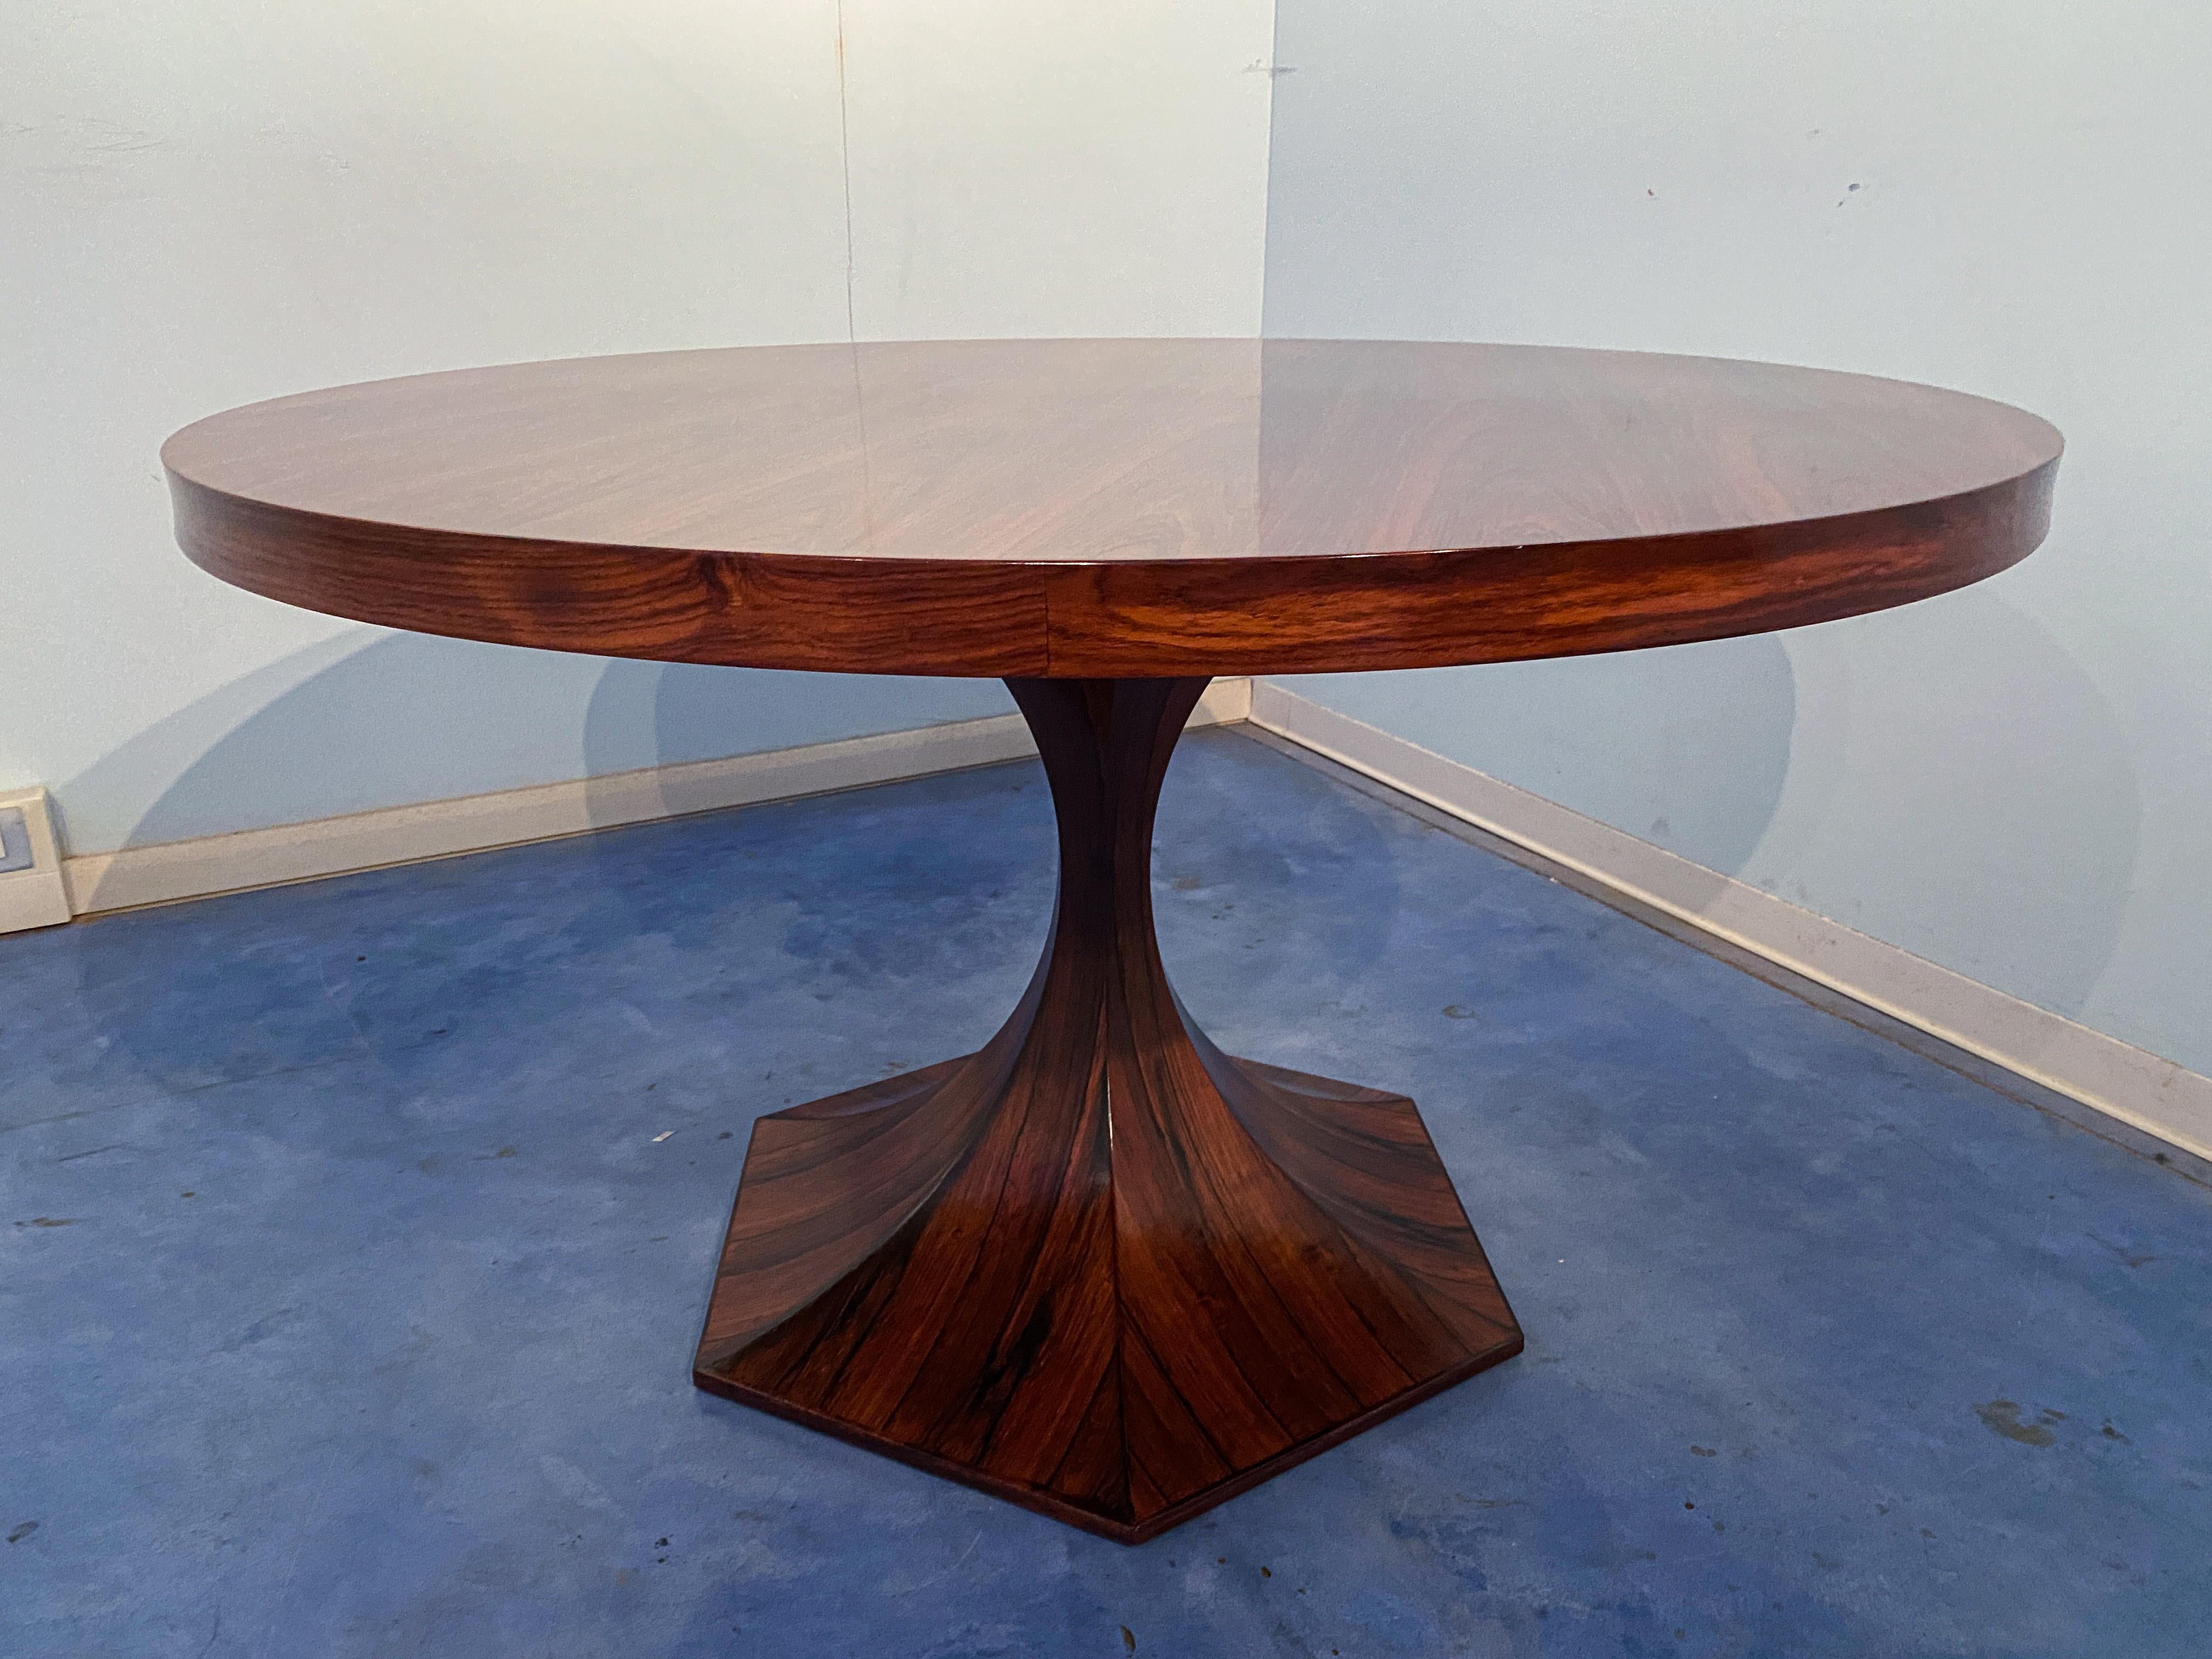 Dating back to the mid-1900s, this exquisite piece of furniture is a true marvel of Italian design. Designed by Giulio Moscatelli, circa 1964, made by Meroni, this table is a perfect blend of elegance and functionality. Crafted entirely in rich